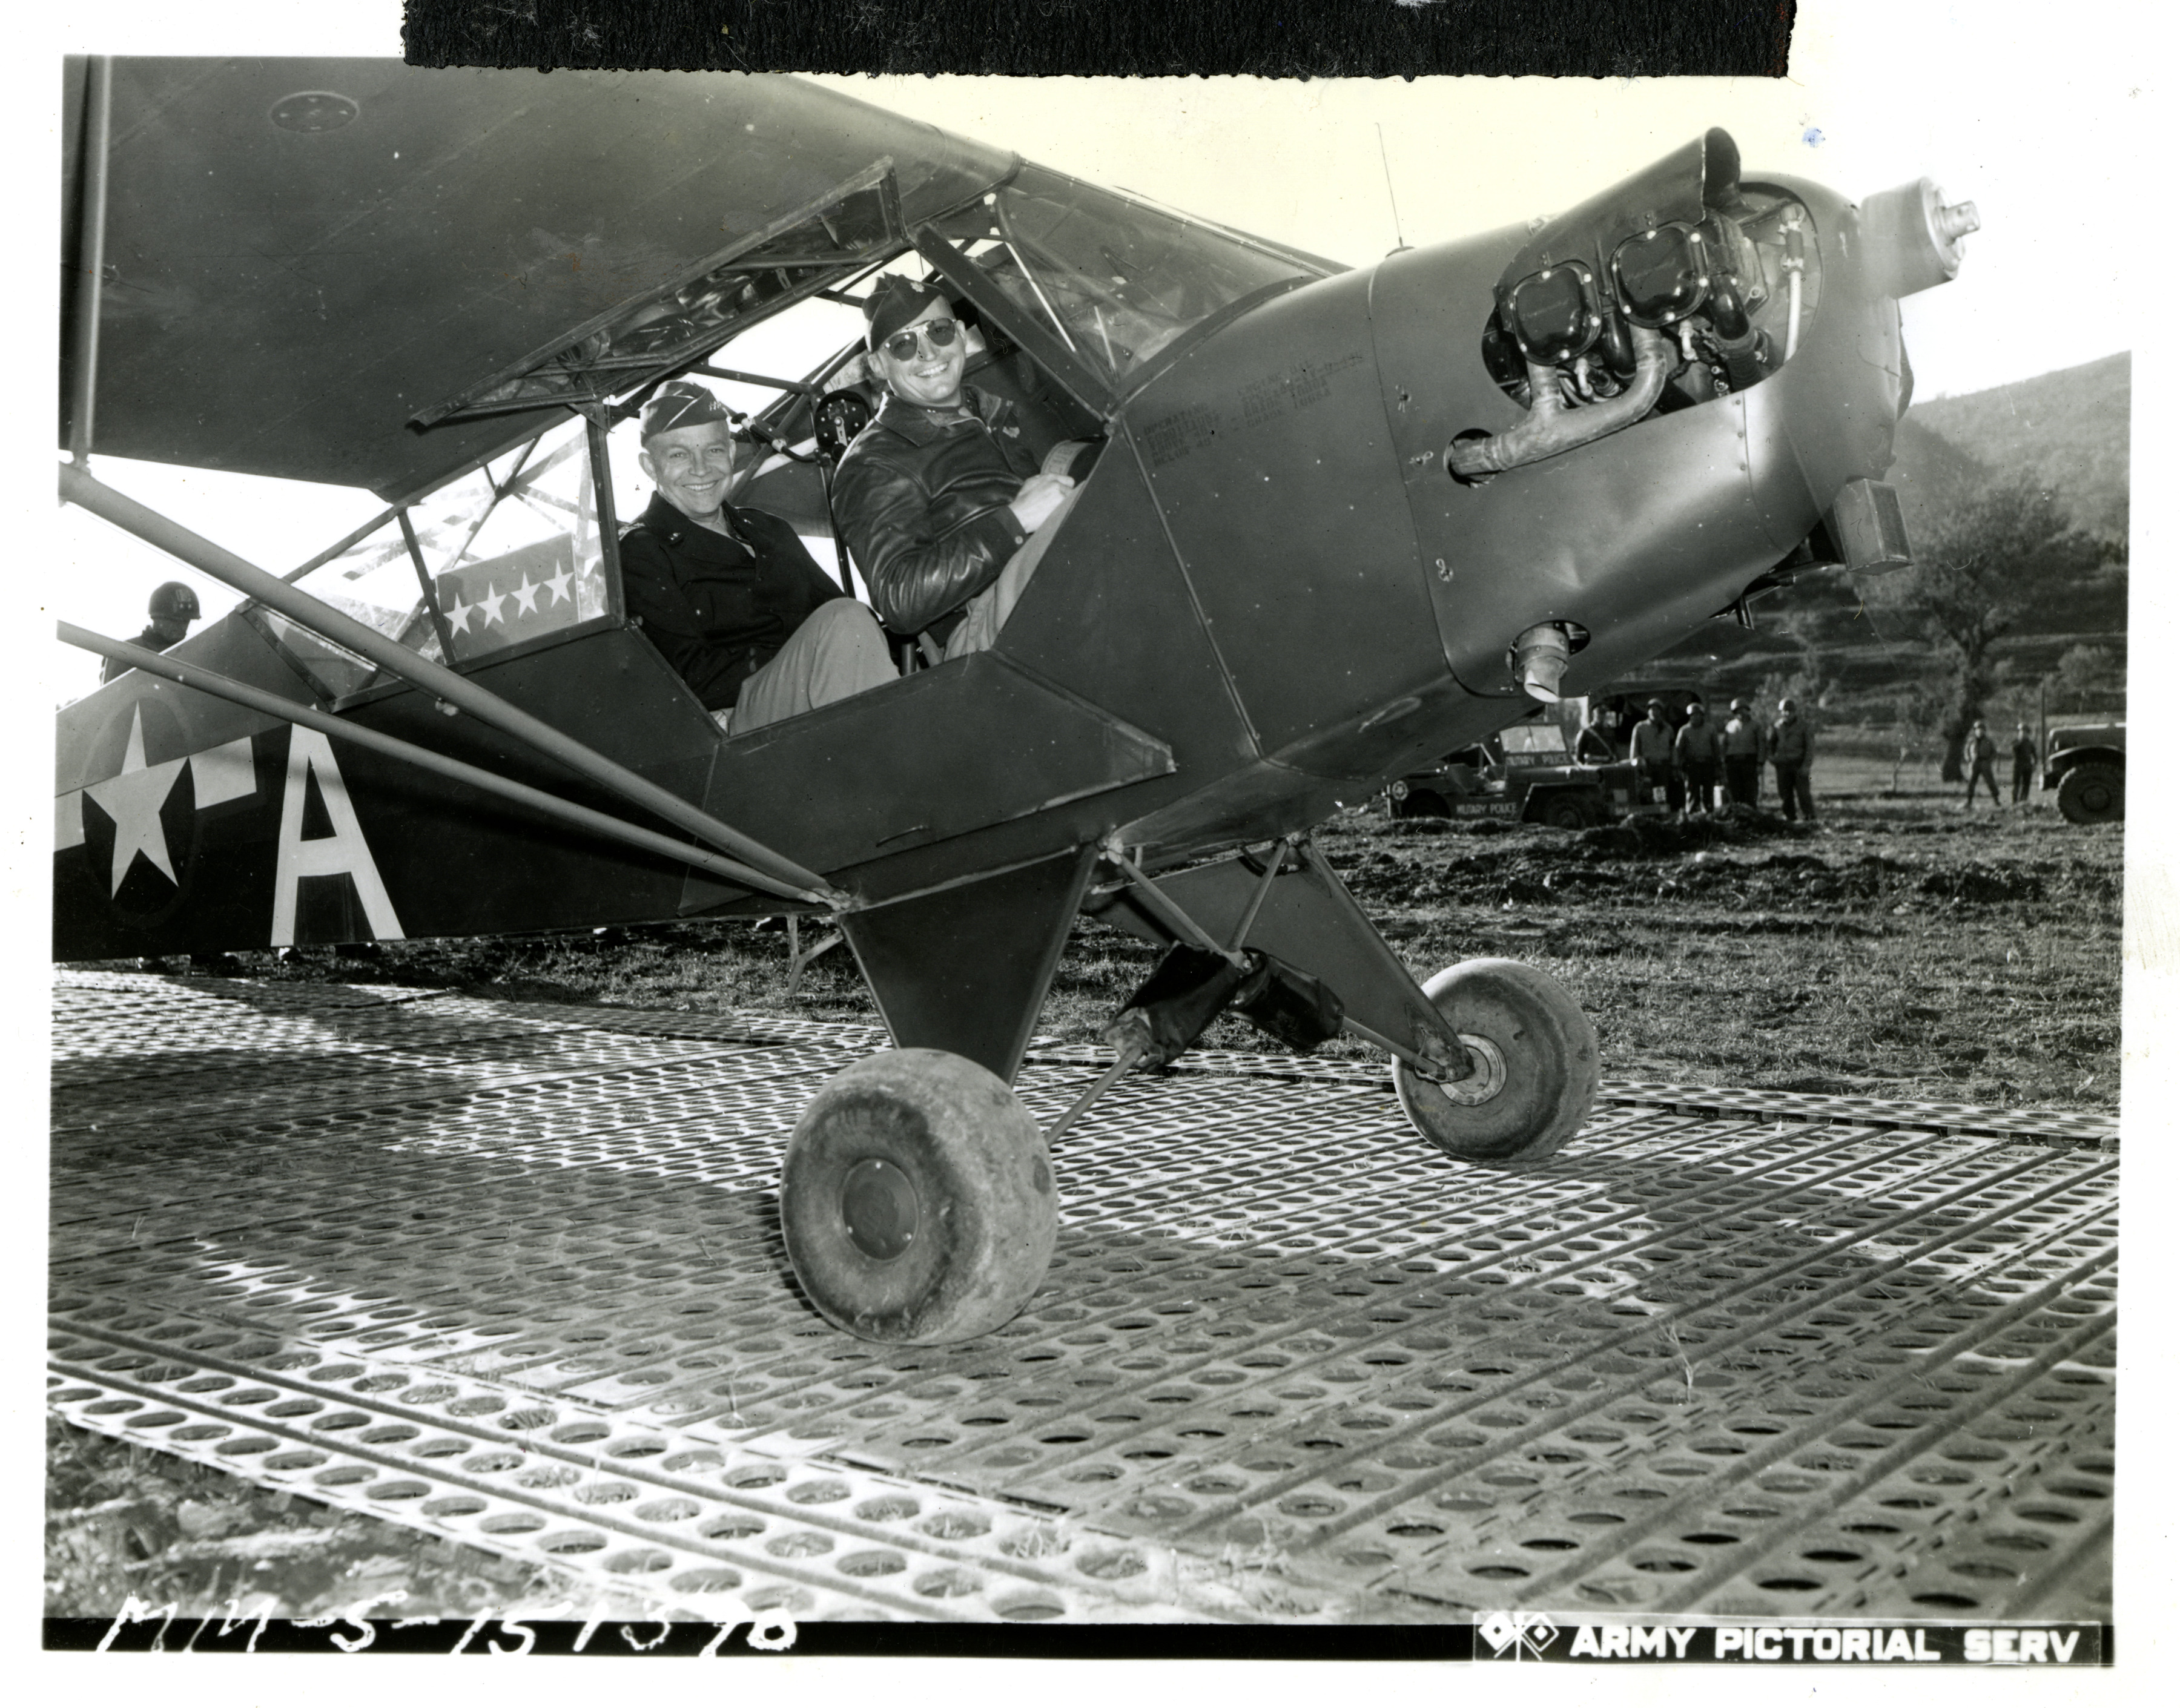 <p class='eng'>MM-5-151370; "Italy! General Eisenhower flies back from the fighting lines. The Commander-in-Chief, seated in rear of cockpit of the plane [Piper Cub] just before the take-off, had just completed a visit at the battlefront. Piloting the ship is Major T. J. Walker (right) of the Fifth Army." Confidential Sig. [Signal] Corps Photo 12-27-43." Italy. 27 December 1943.</p>